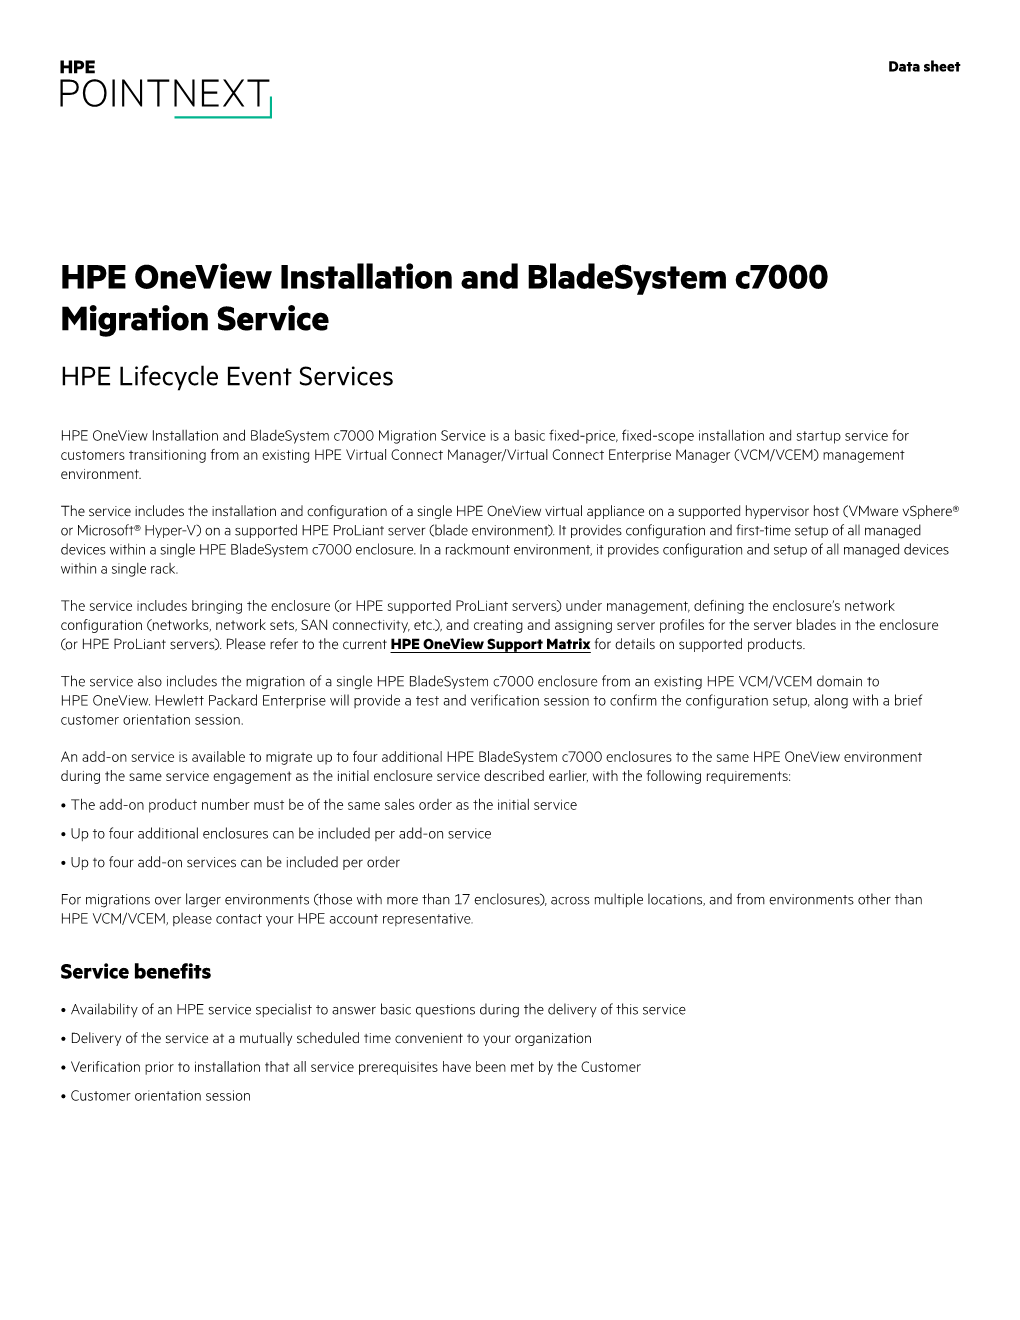 HPE Oneview Installation and Bladesystem C7000 Migration Service HPE Lifecycle Event Services